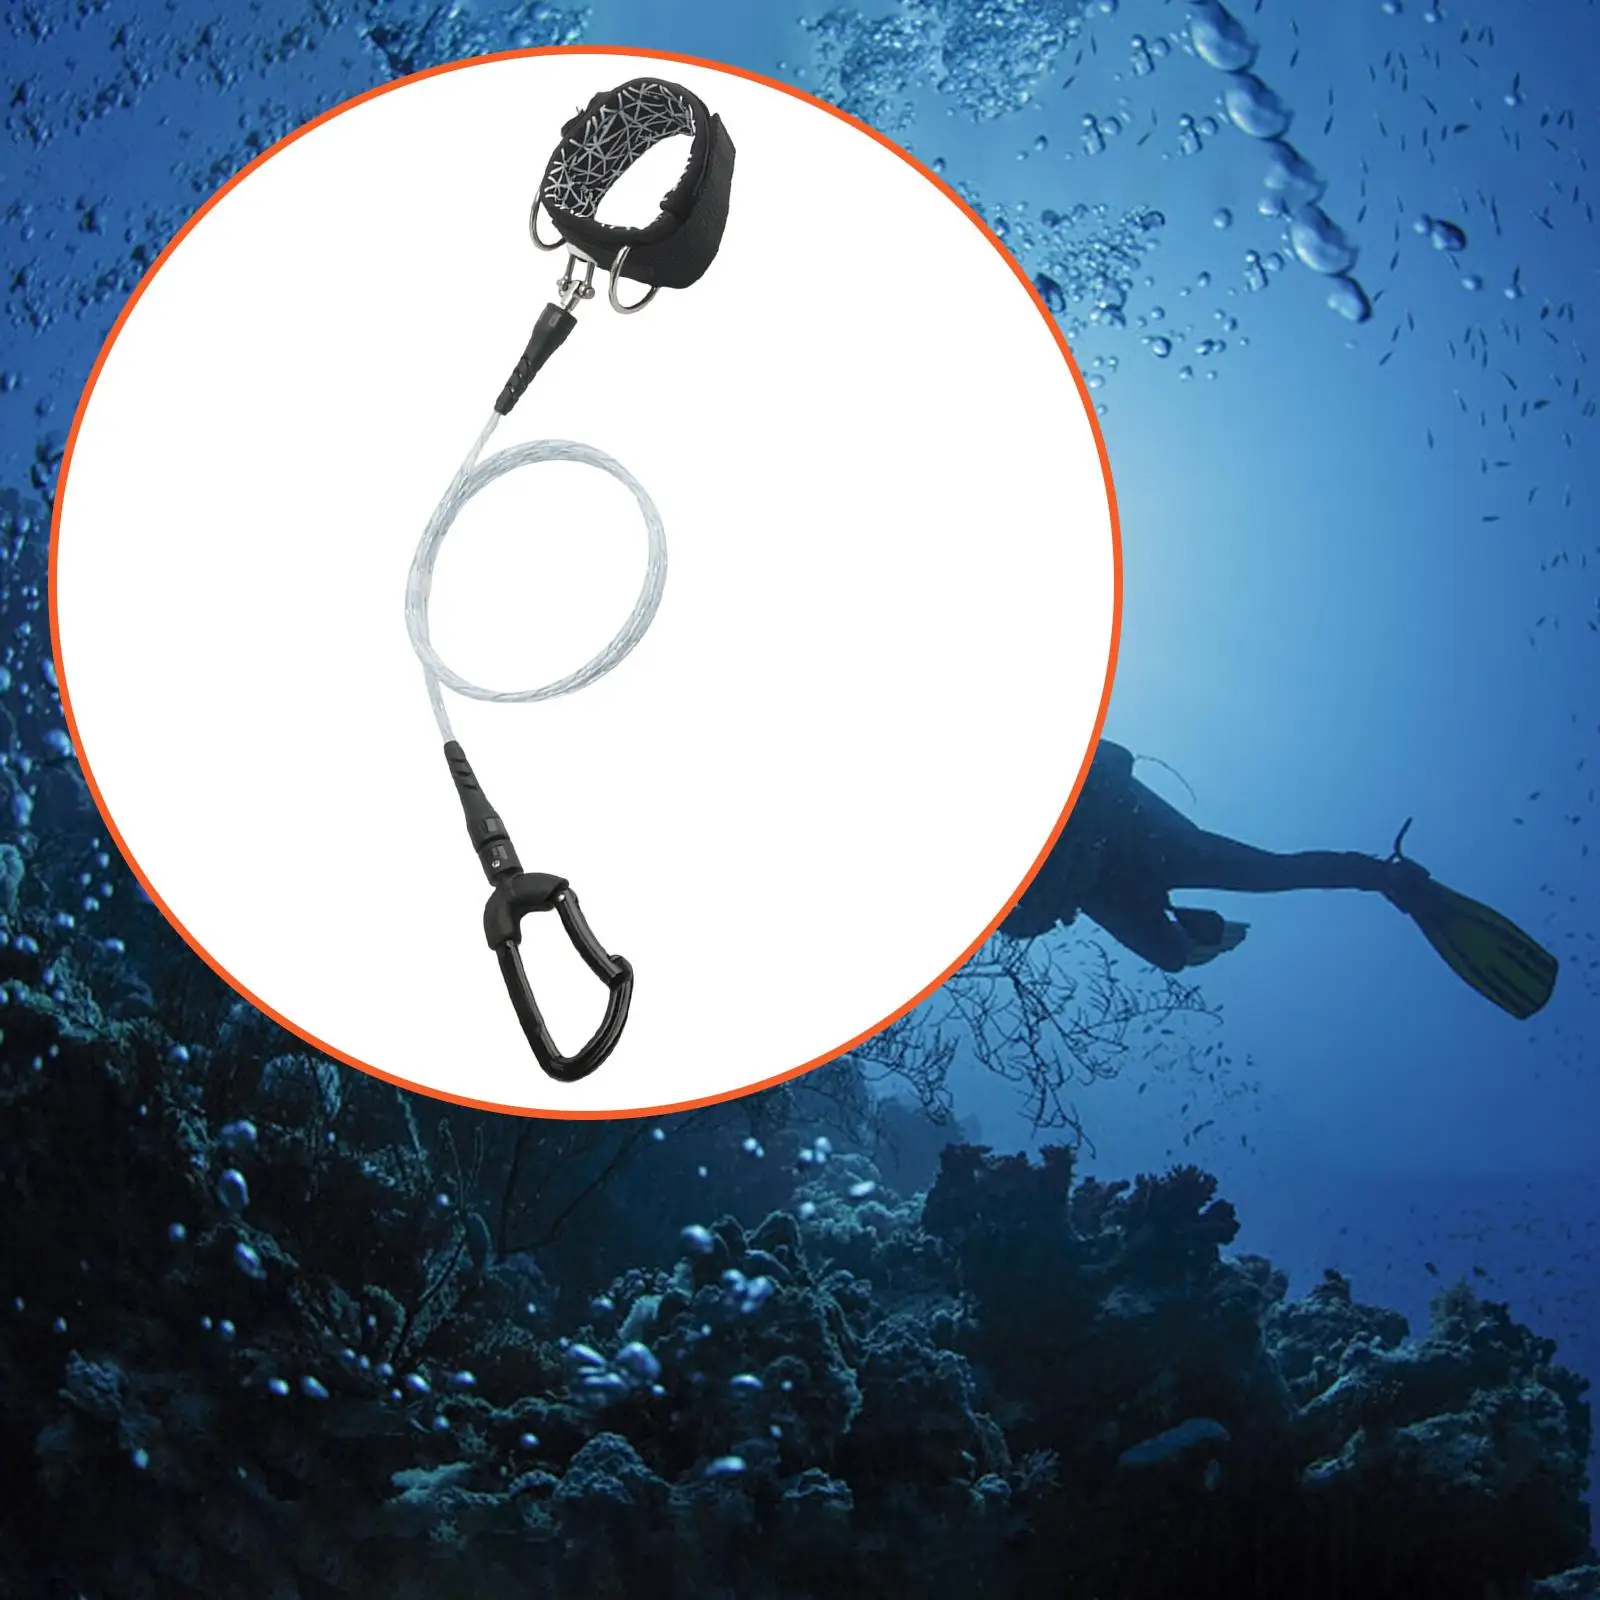 Freediving Lanyard Leash Professional Anti Lost Safety Cable Scuba Diving Rope for Underwater Sports Freediving Snorkeling Gear